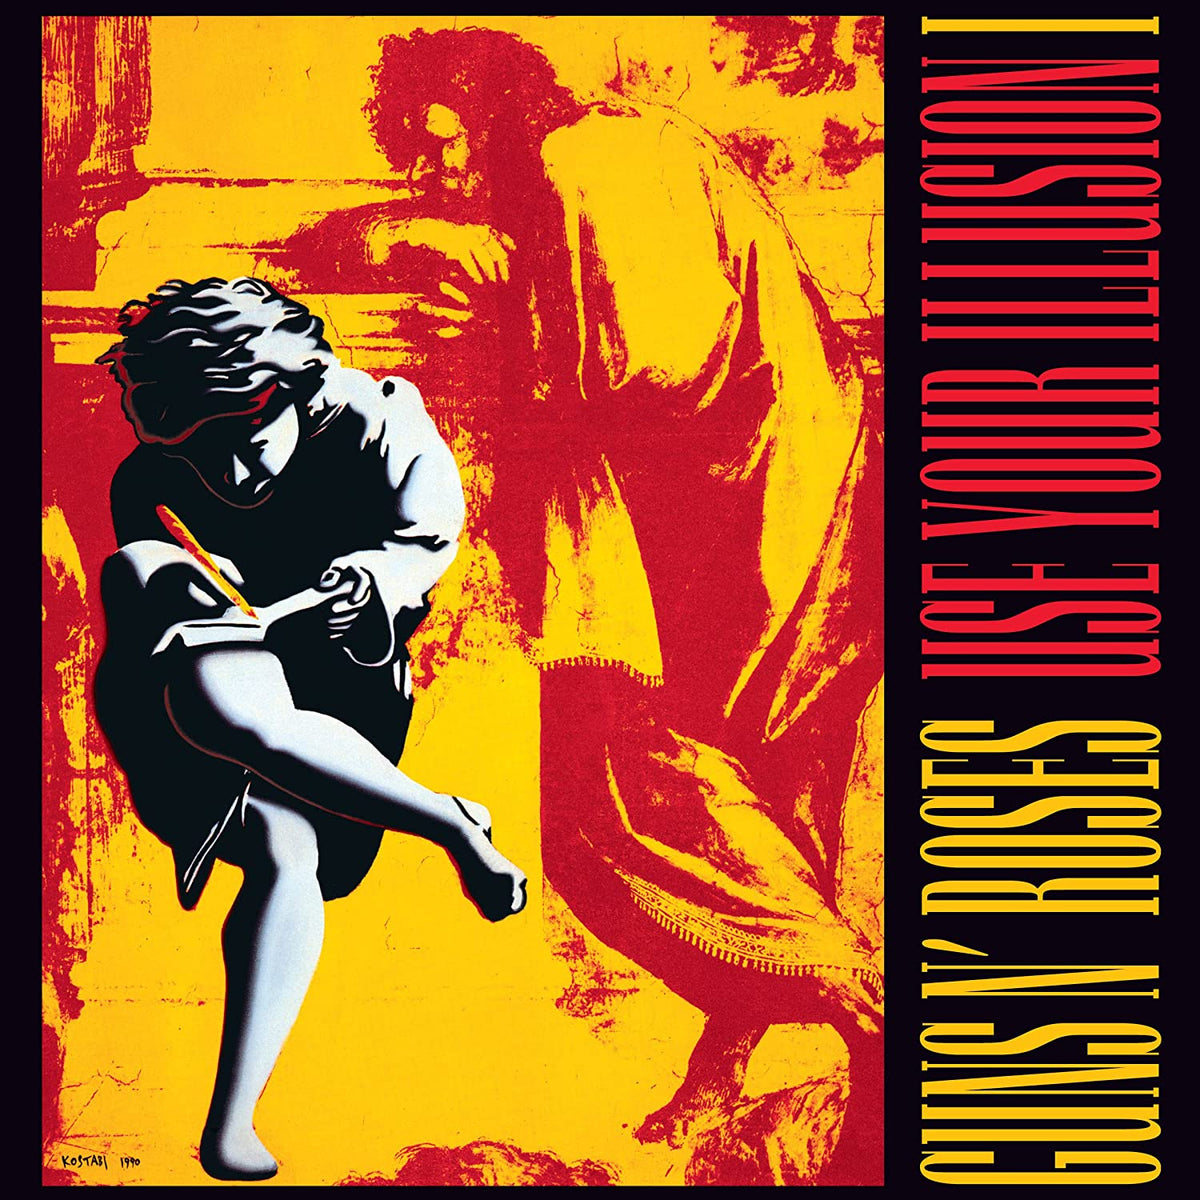 Guns N' Roses - Use Your Illusion I (CD 2022 Reissue)